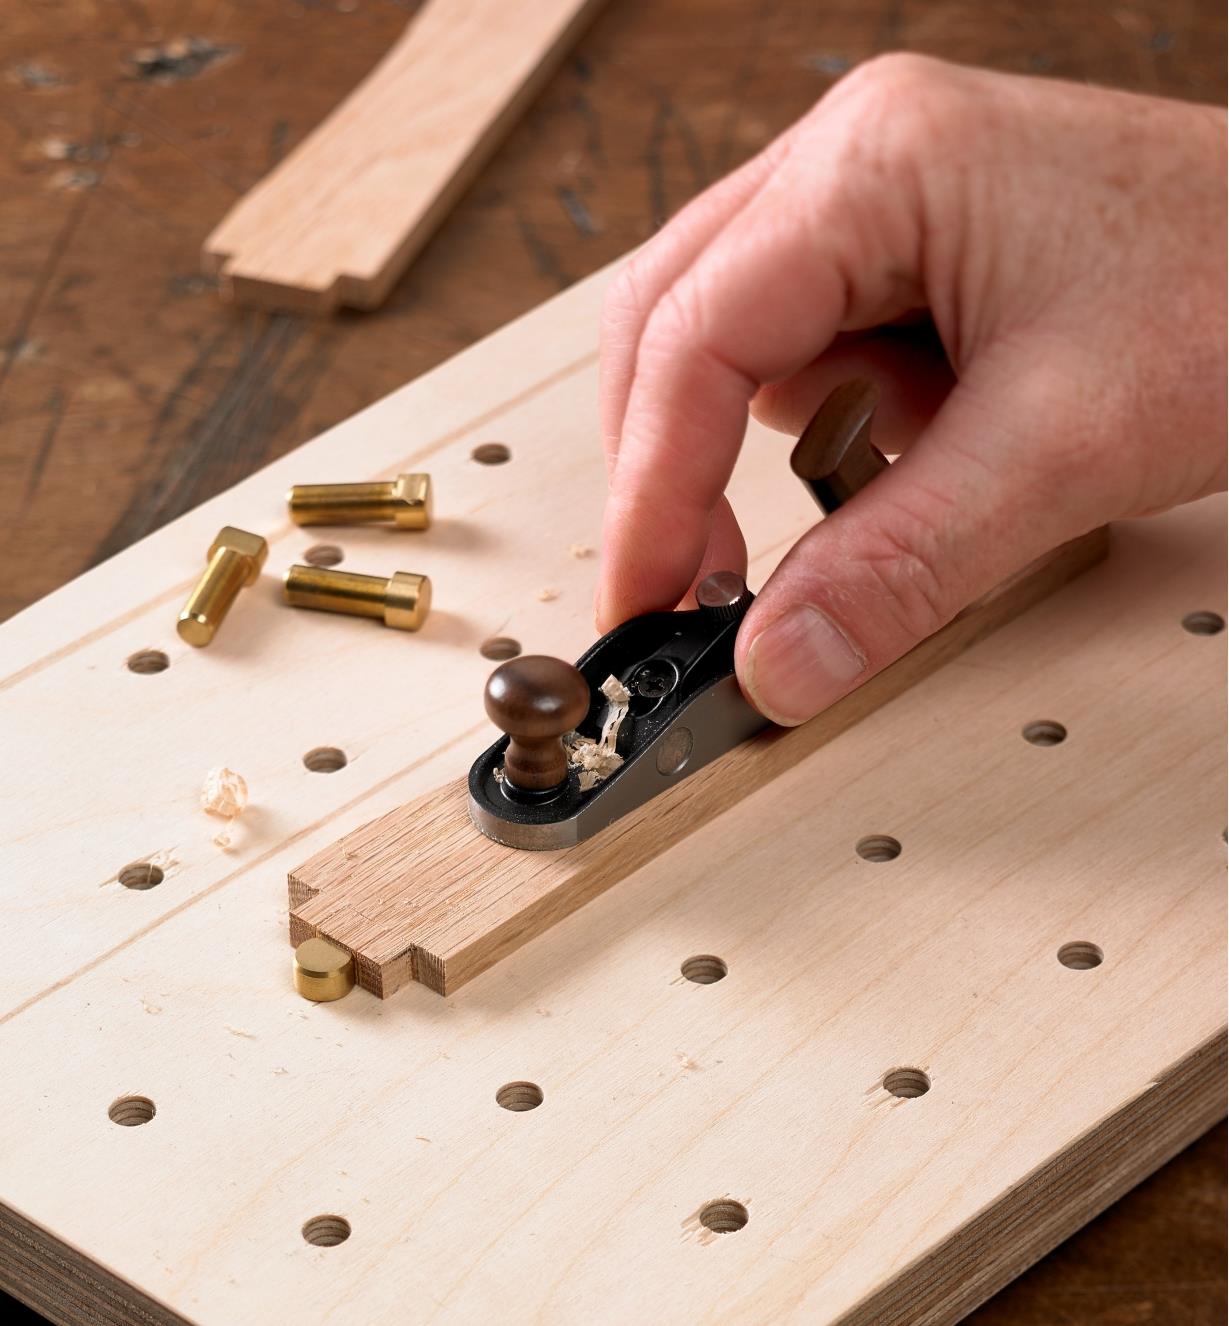 A Veritas miniature surface dog restrains a workpiece as it is being planed with a Veritas miniature bench plane